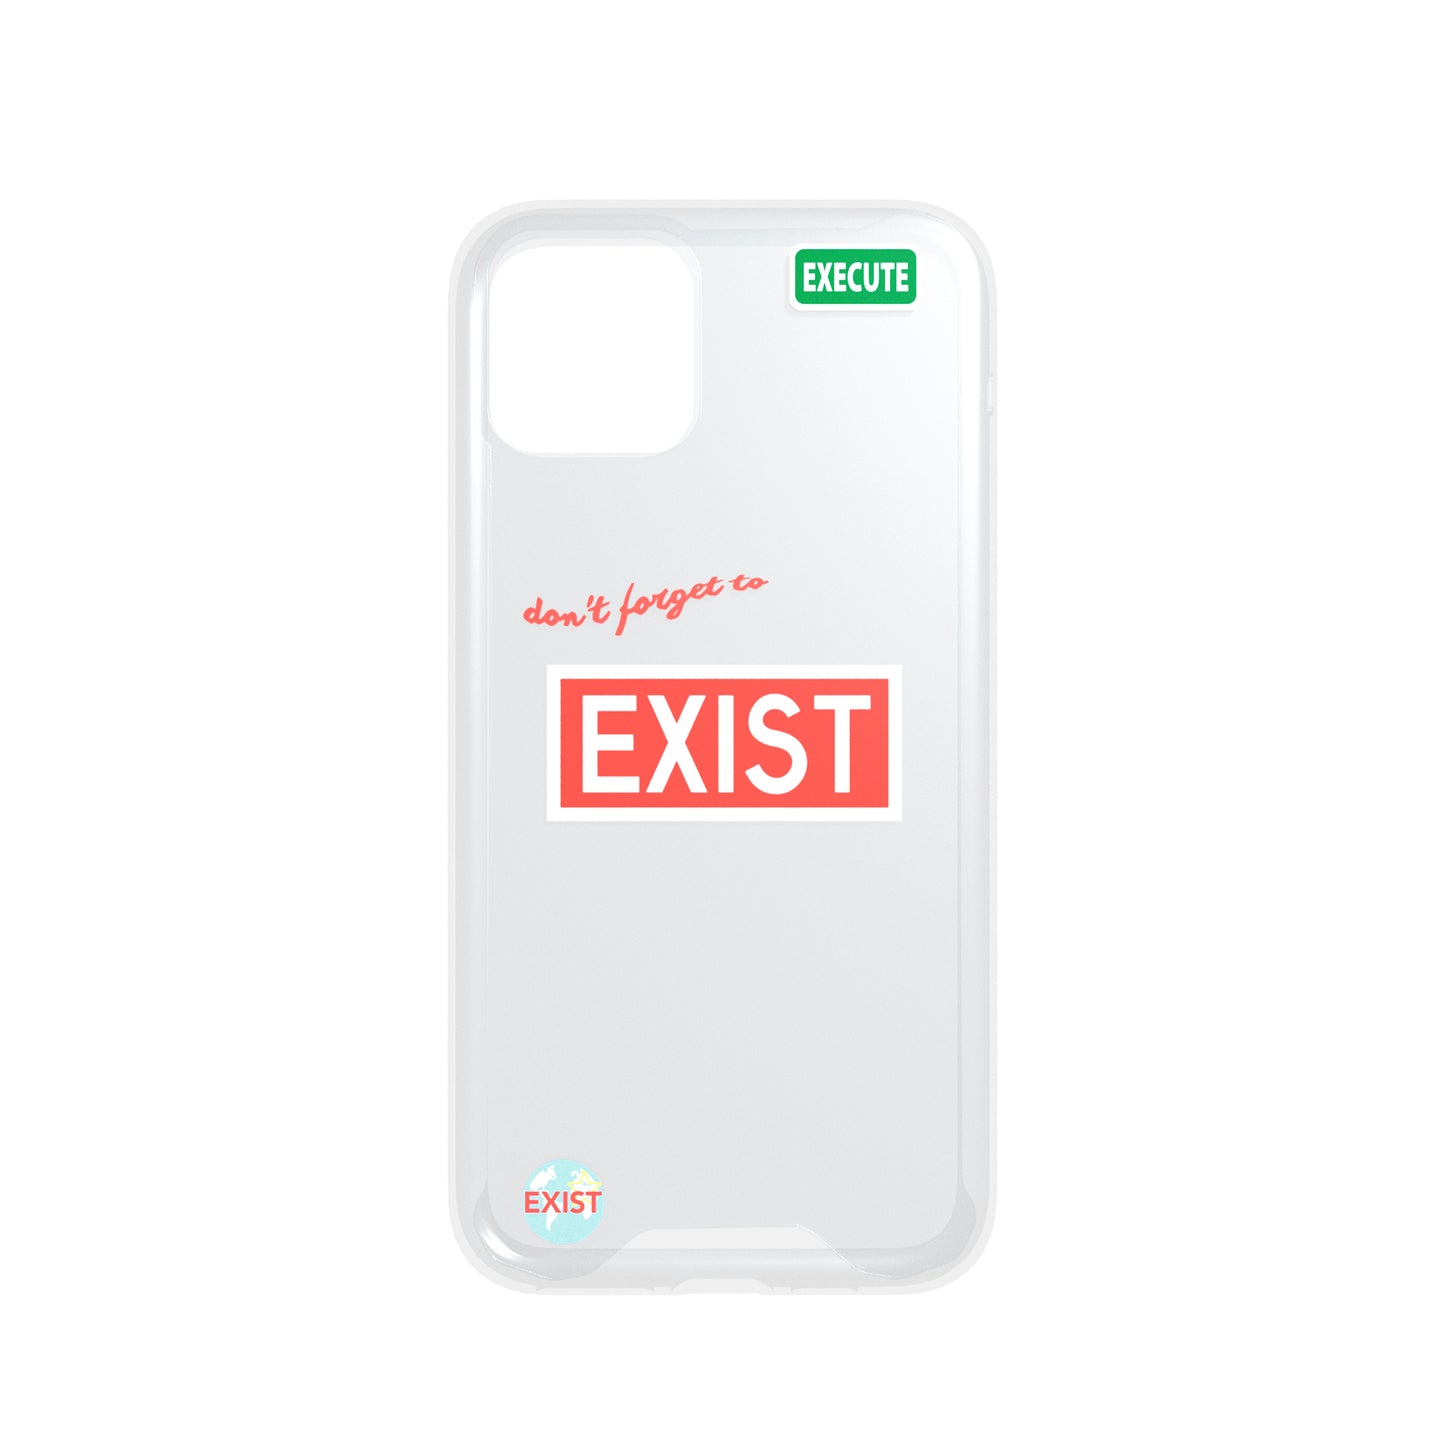 EXIST iPhone Case - Red